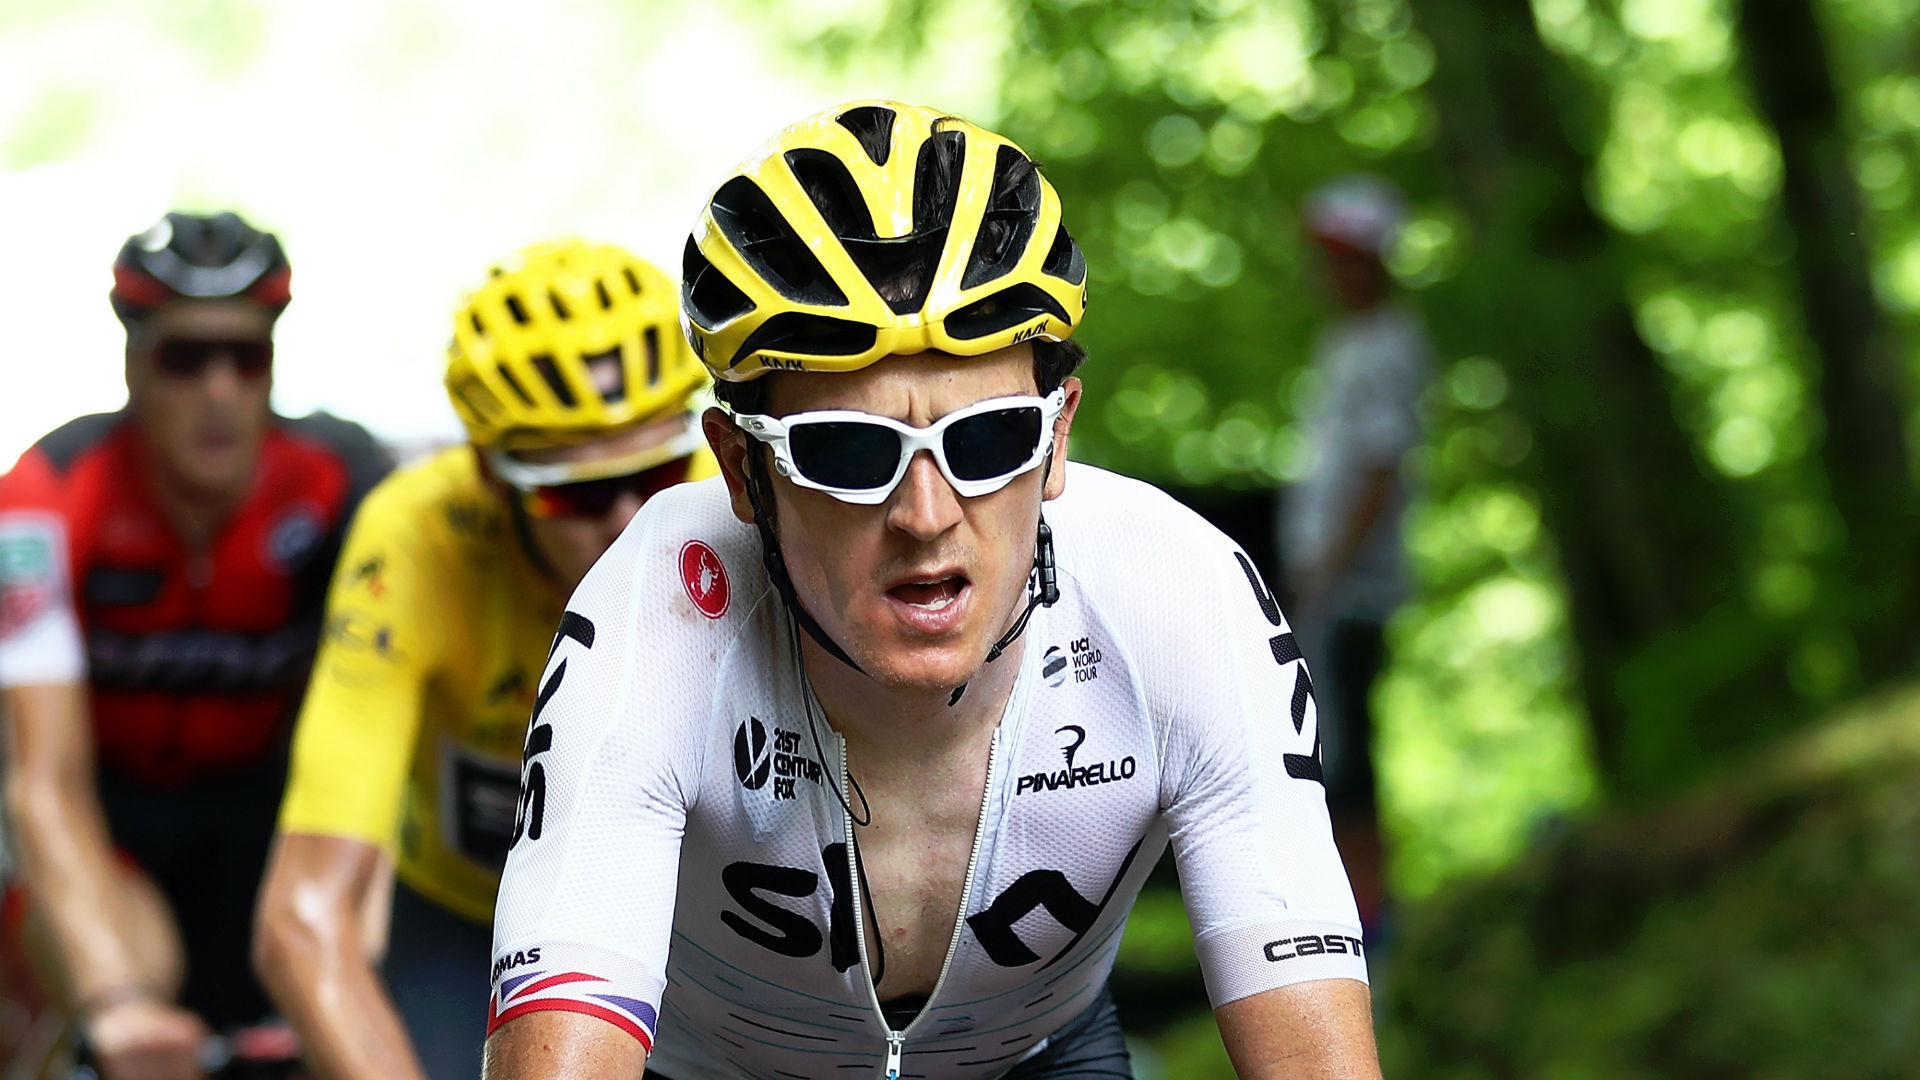 Less than three weeks out from his Tour de France title defence, Geraint Thomas crashed out of the Tour de Suisse on Tuesday.